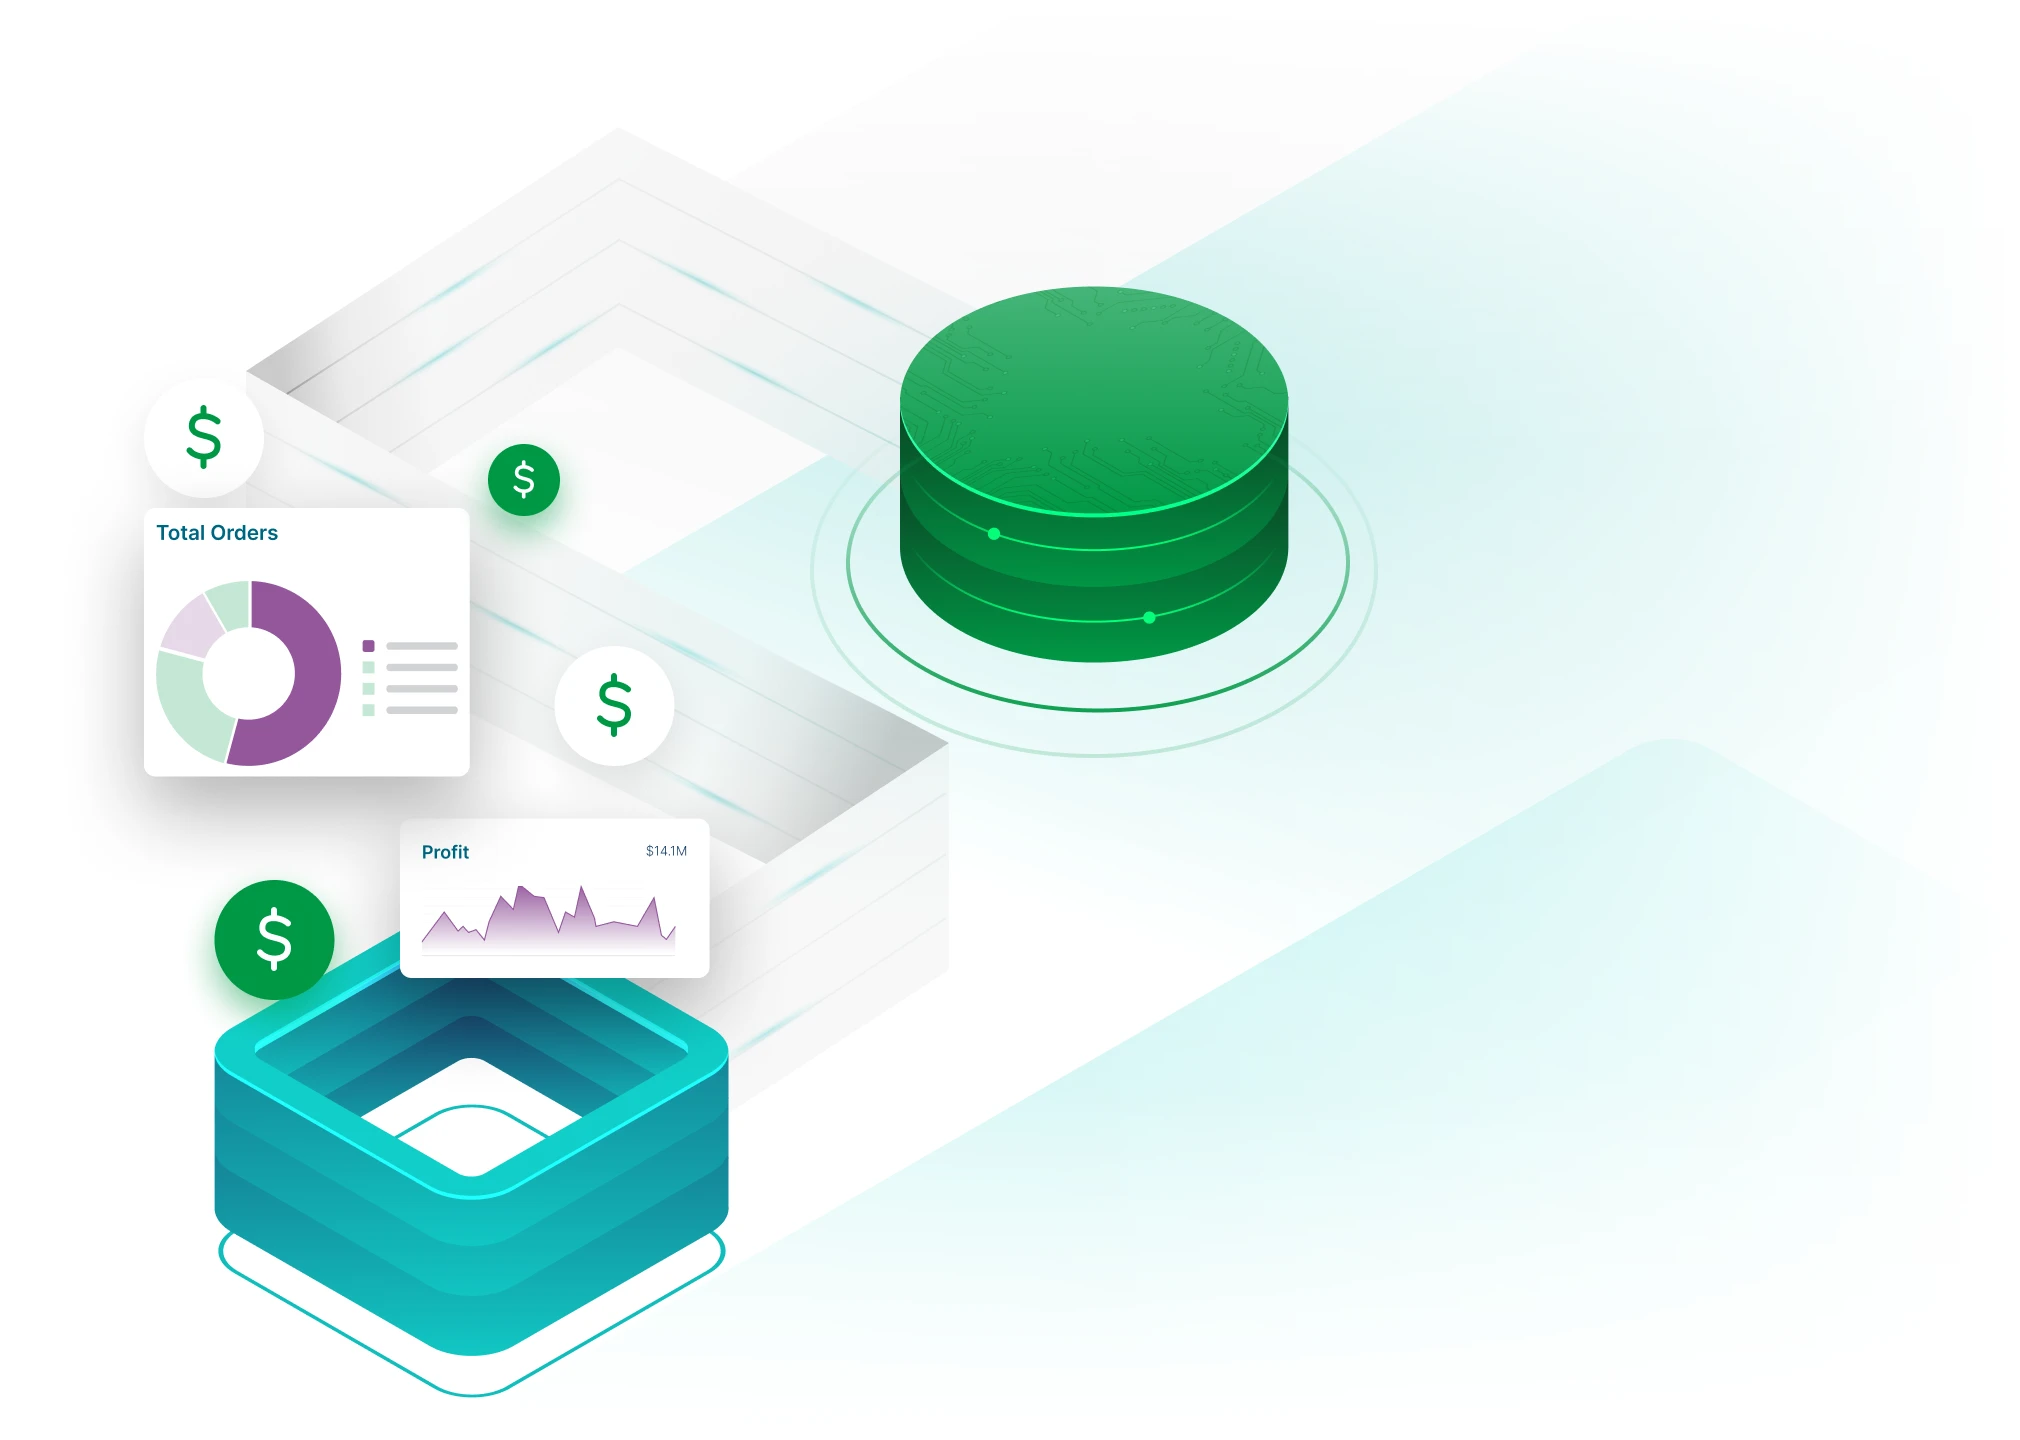 Abstract financial illustration showing a 3D green database, a stack of teal squares, and two data visuals: a pie chart labeled 'Total Orders' and a line chart labeled 'Profit'. Icons with dollar signs are placed around the metric visuals.